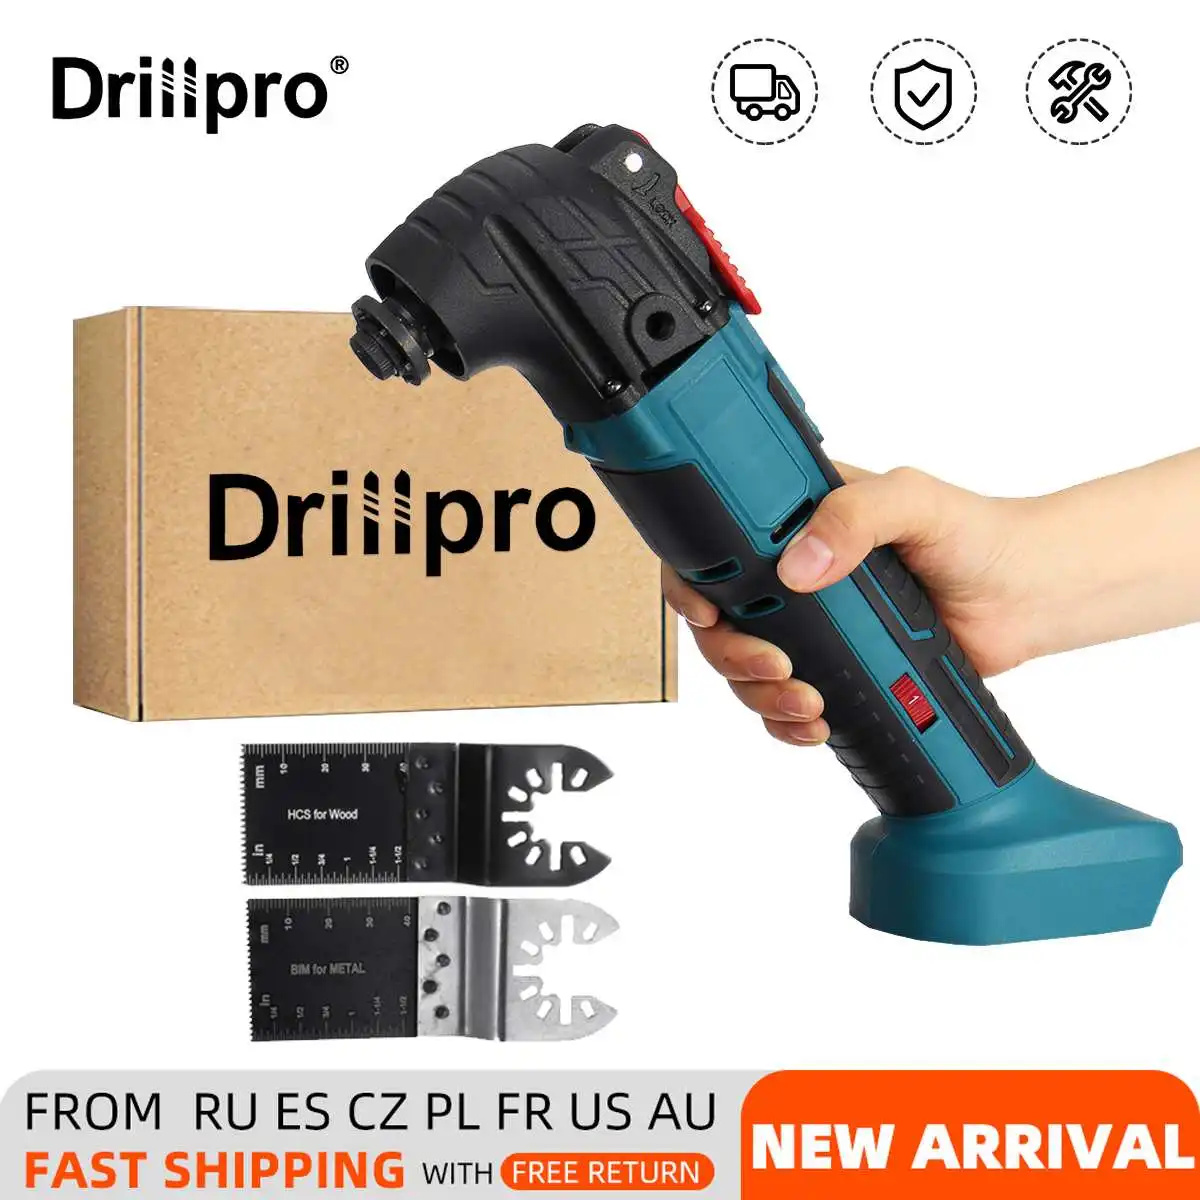 

Drillpro Cordless Oscillating Multi function tool Electric Saw Trimmer Cutting Machine Woodworking tool for Makita 18V Battery